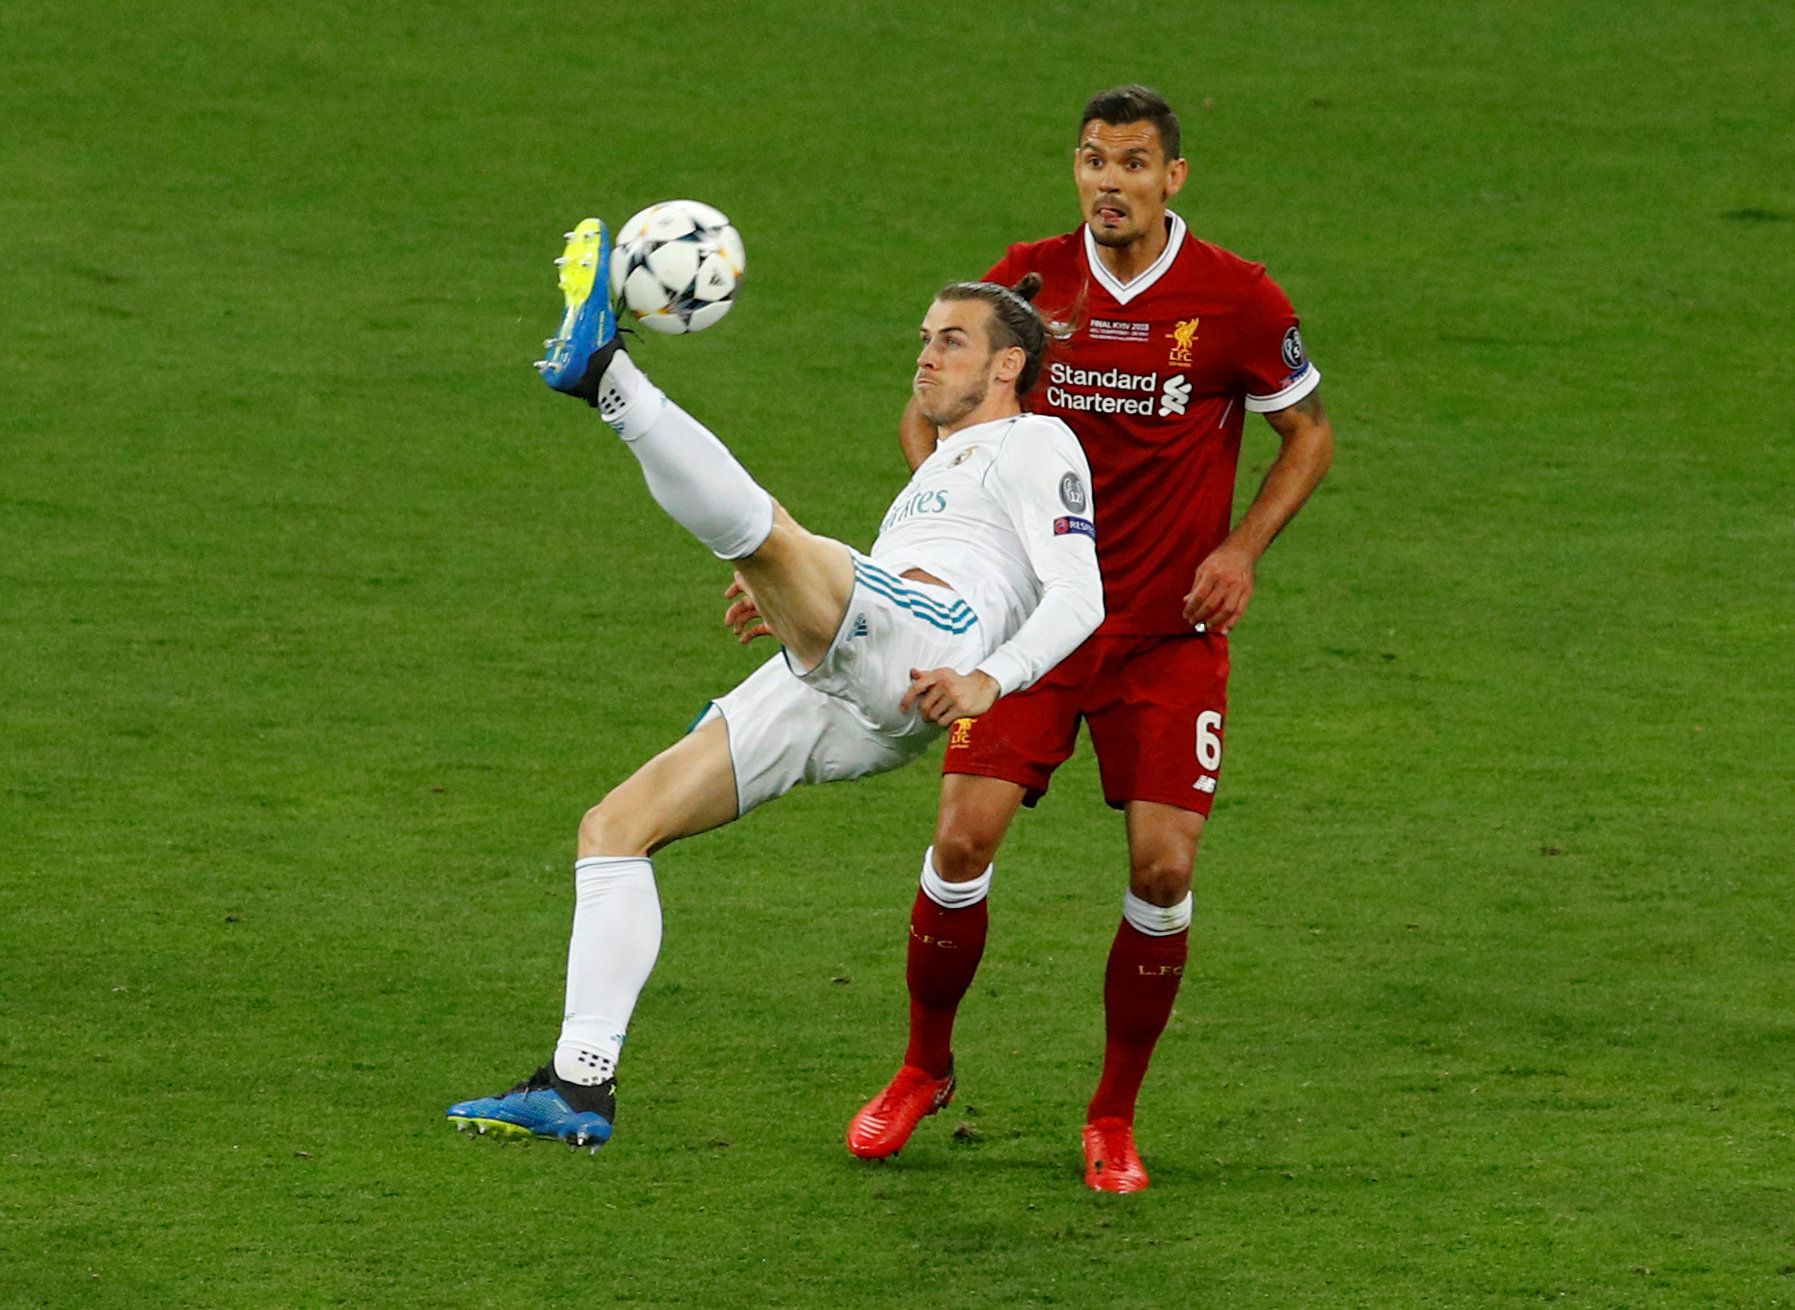 Soccer Football - Champions League Final - Real Madrid v Liverpool - NSC Olympic Stadium, Kiev, Ukraine - May 26, 2018   Real Madrid's Gareth Bale scores their second goal    REUTERS/Phil Noble